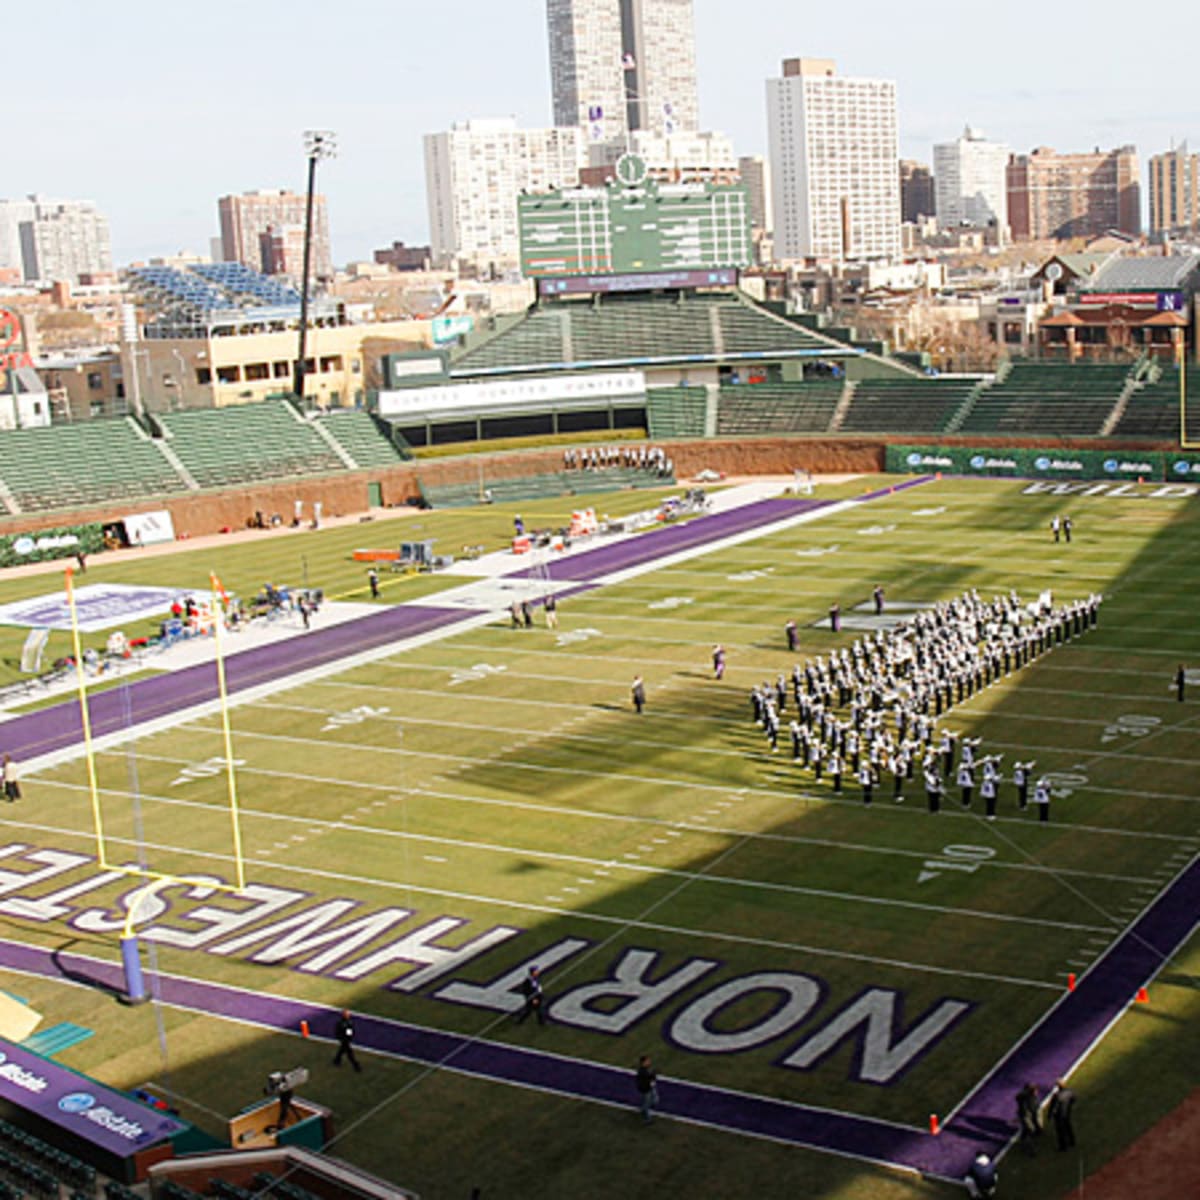 Wrigley Field Football: Why This Could Be the Coolest Sports Event